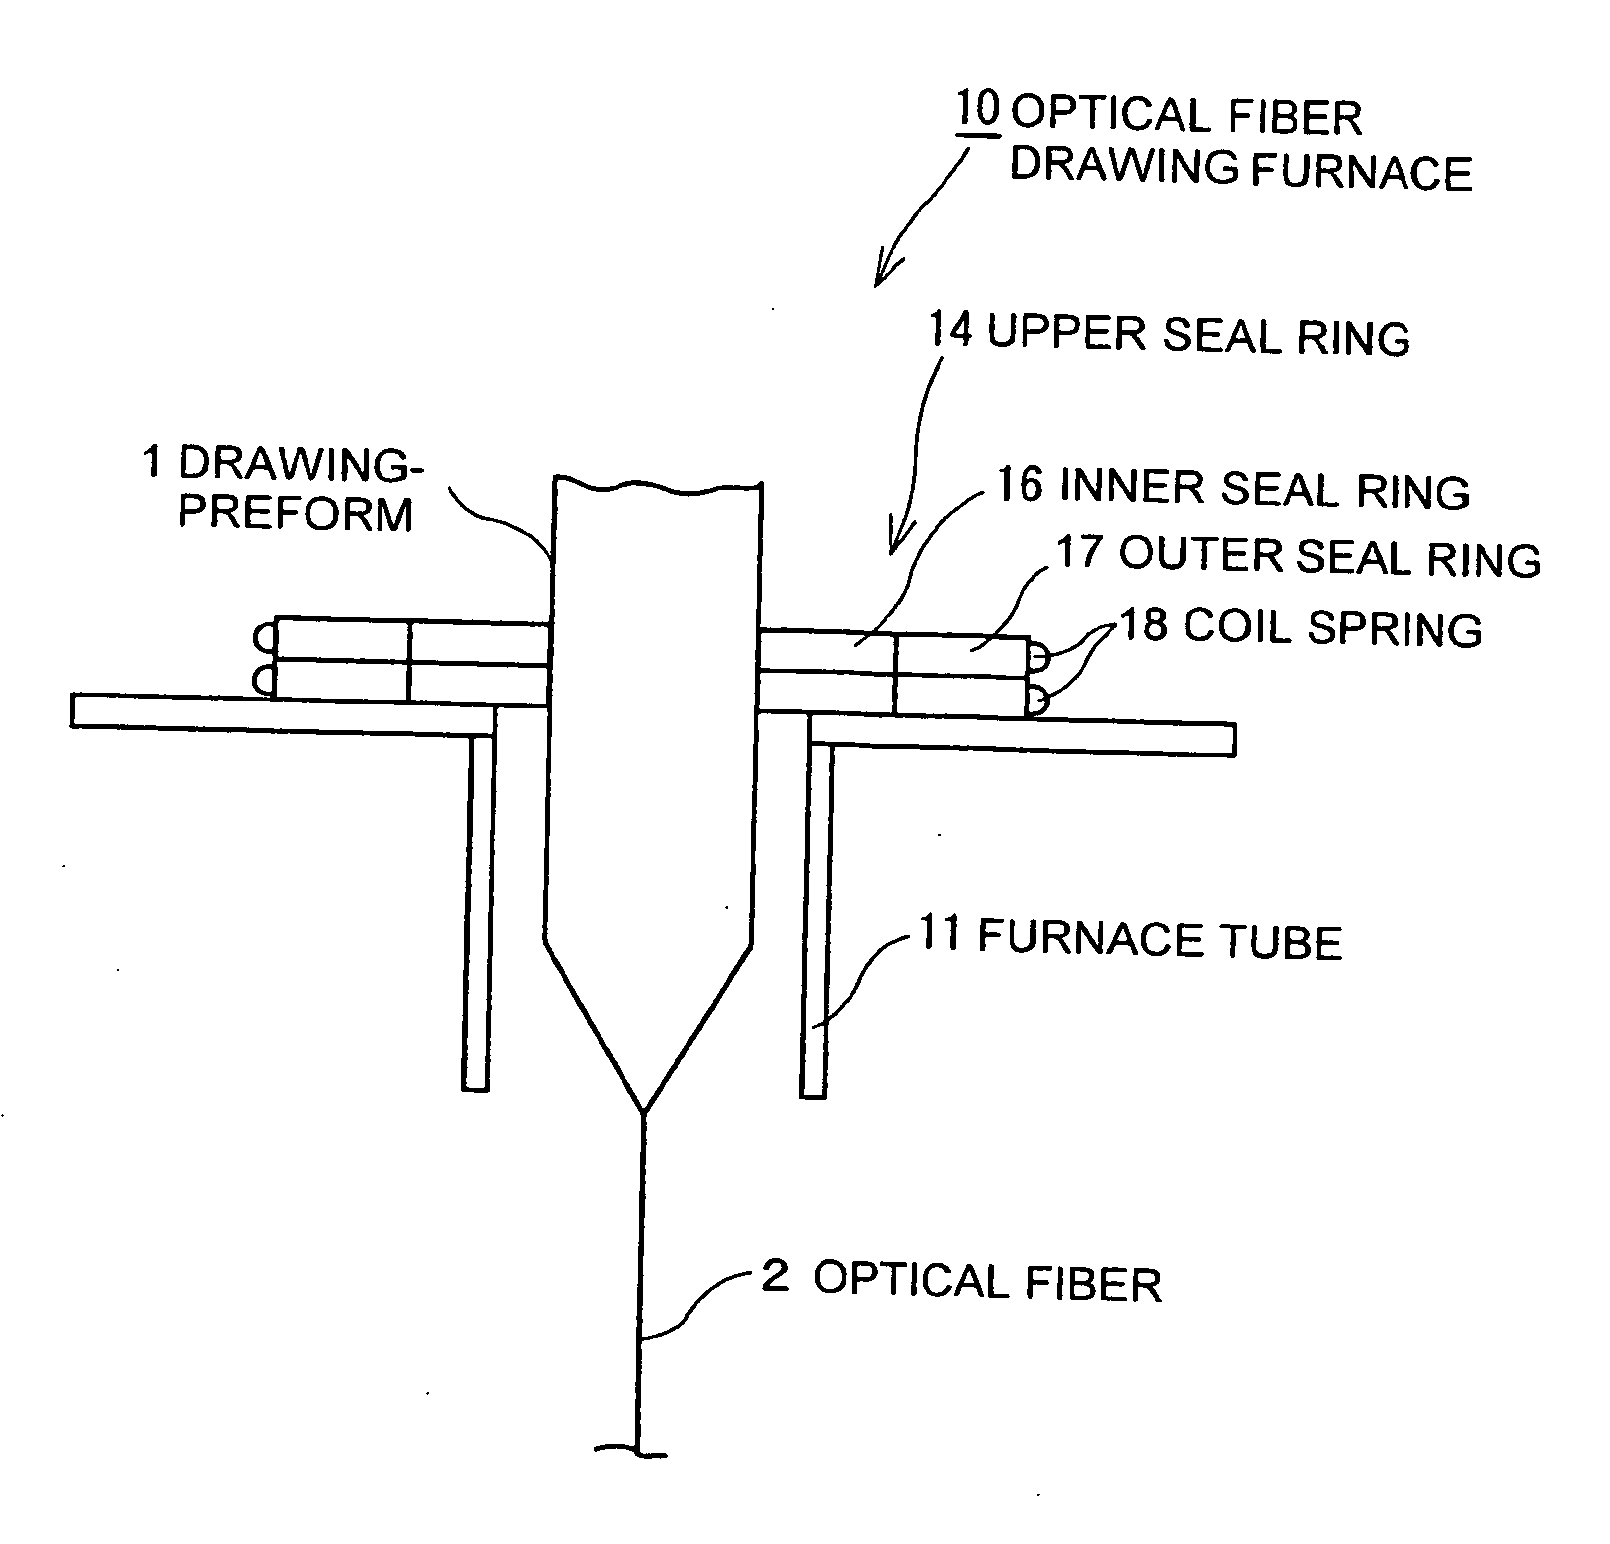 Optical fiber drawing apparatus, sealing mechanism for the same, and method for drawing an optical fiber